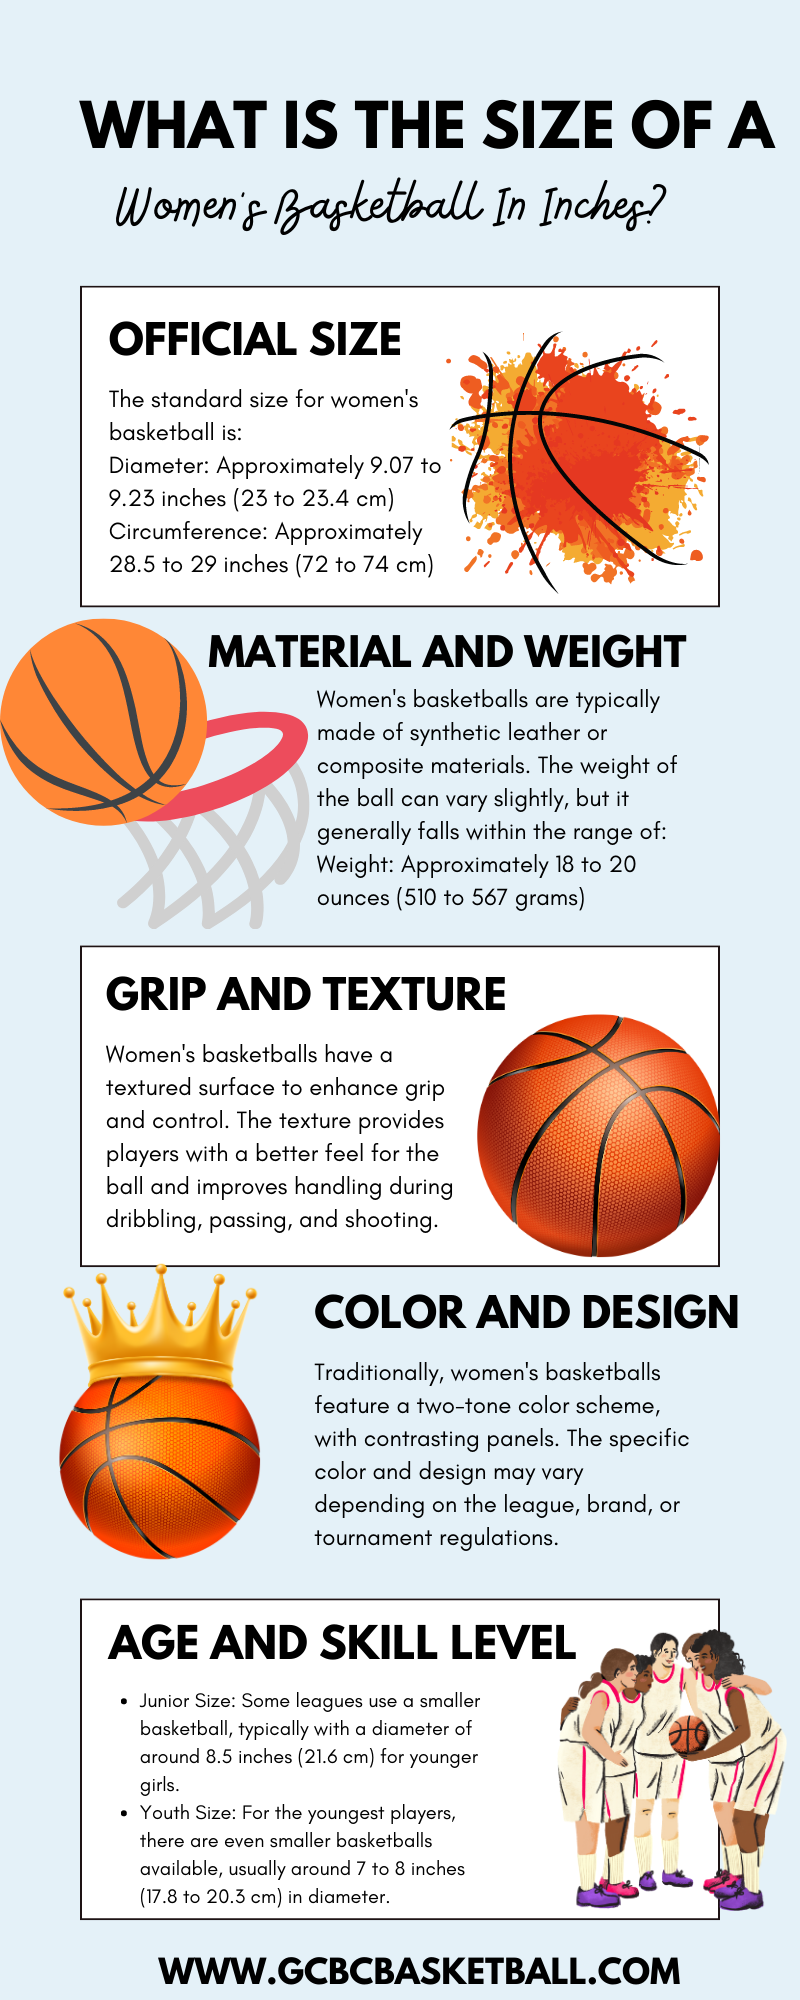 What Is The Size Of A Women's Basketball In Inches? - GCBCBasketball Blog